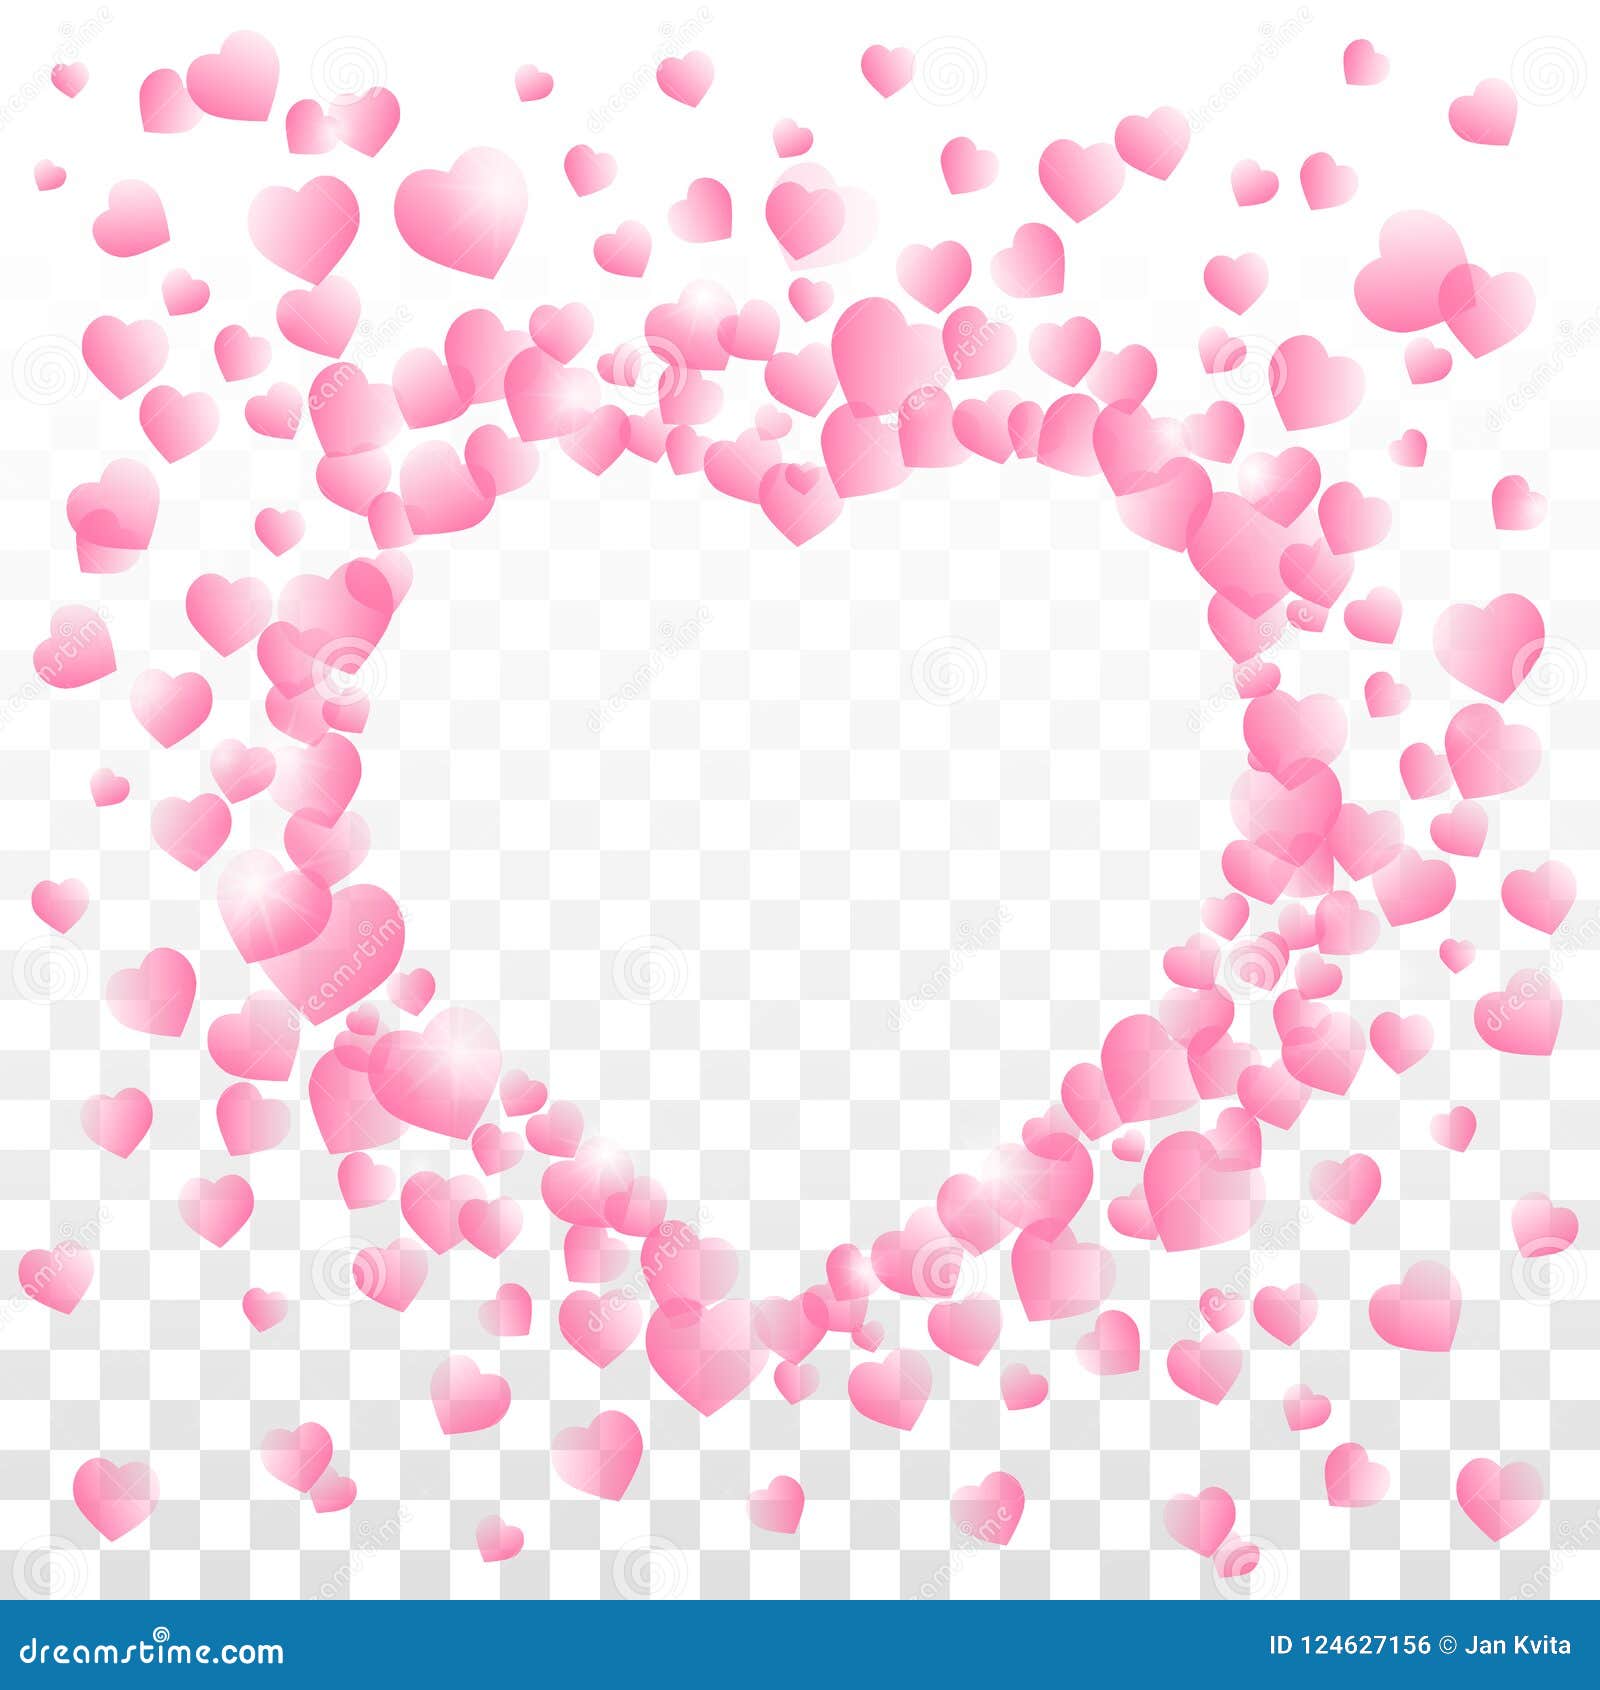 Valentines Day Vector with a Heart Sign Composed of Small Pink Shaded Hearts  on Transparent Background. Stock Vector - Illustration of cute, hearts:  124627156